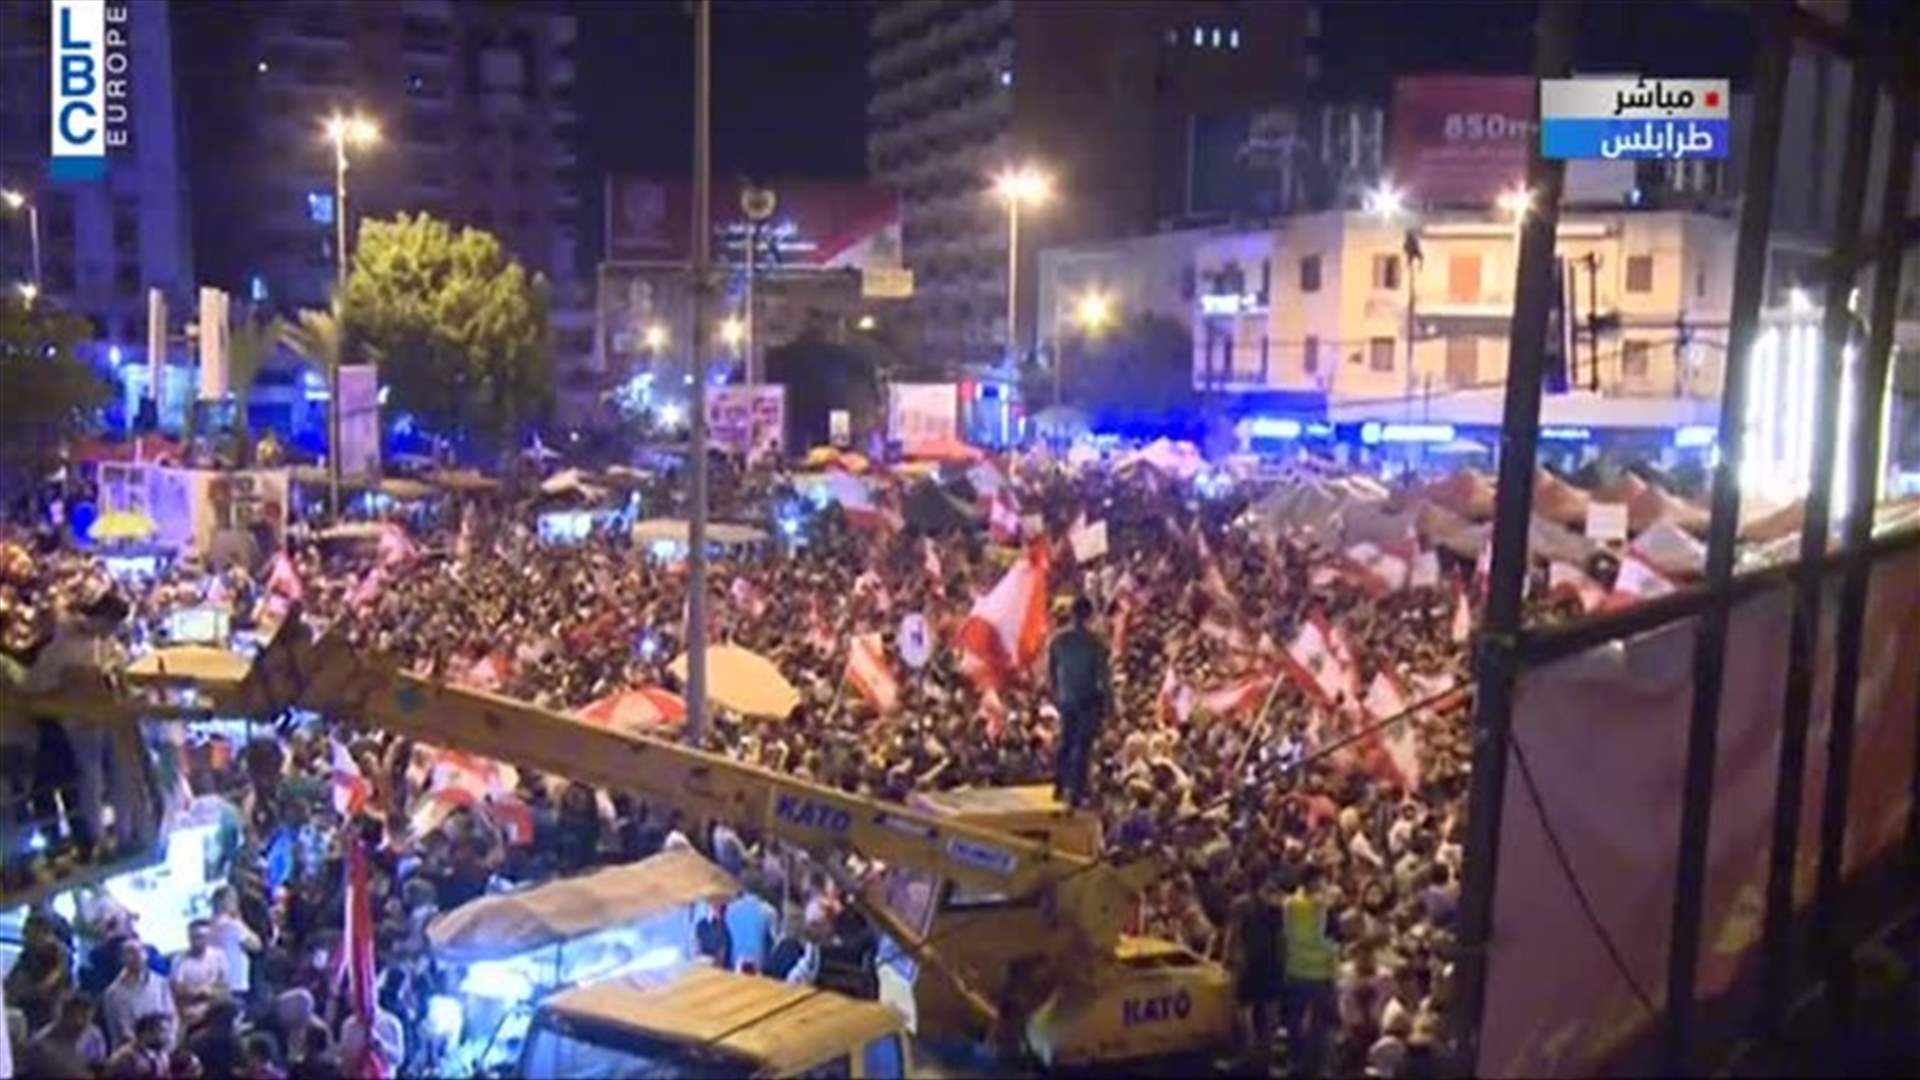 Lebanese people brave rain and hold protests for 7th day